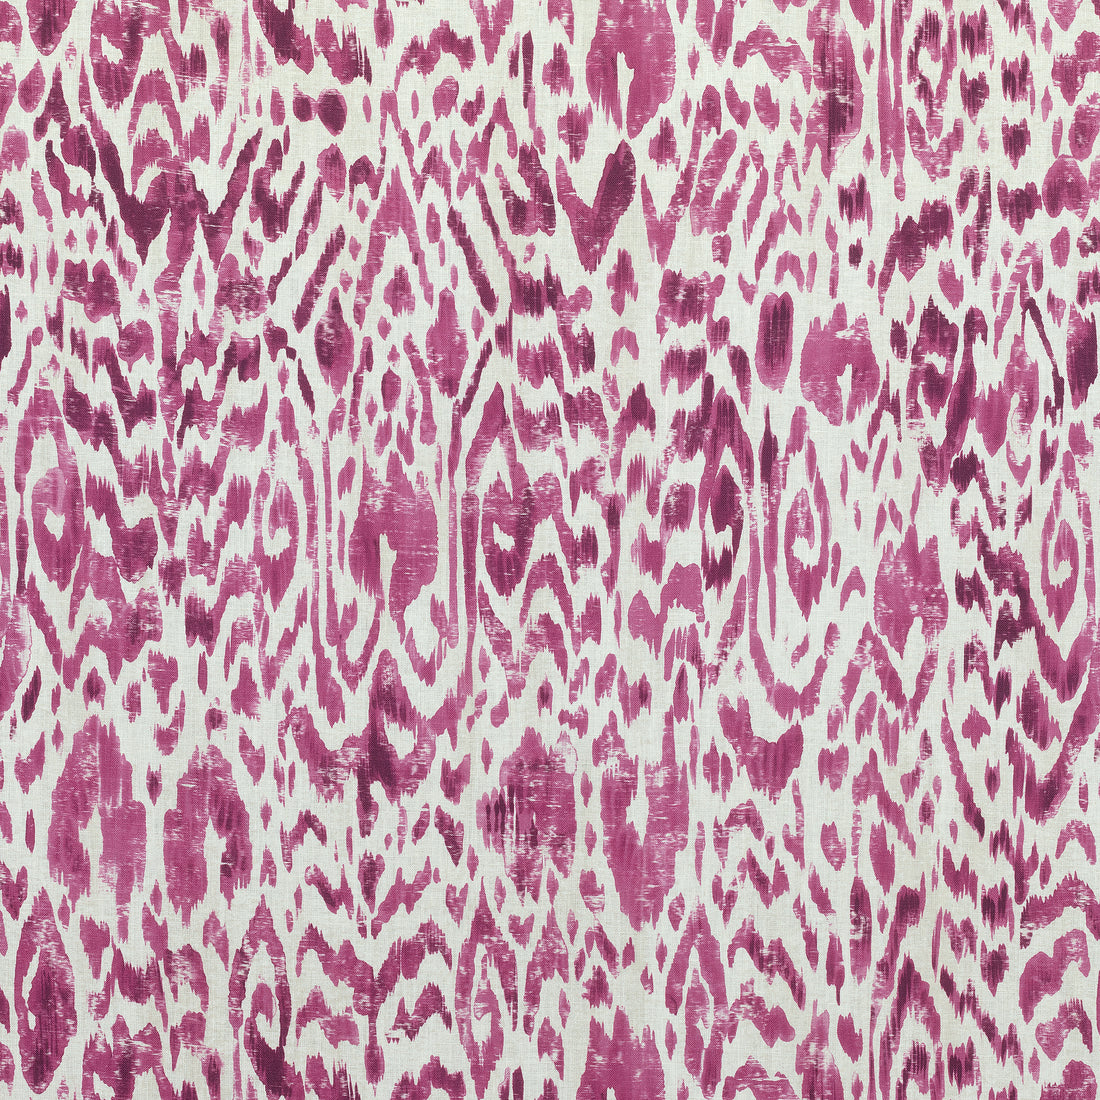 Carlotta fabric in eggplant color - pattern number F975454 - by Thibaut in the Dynasty collection